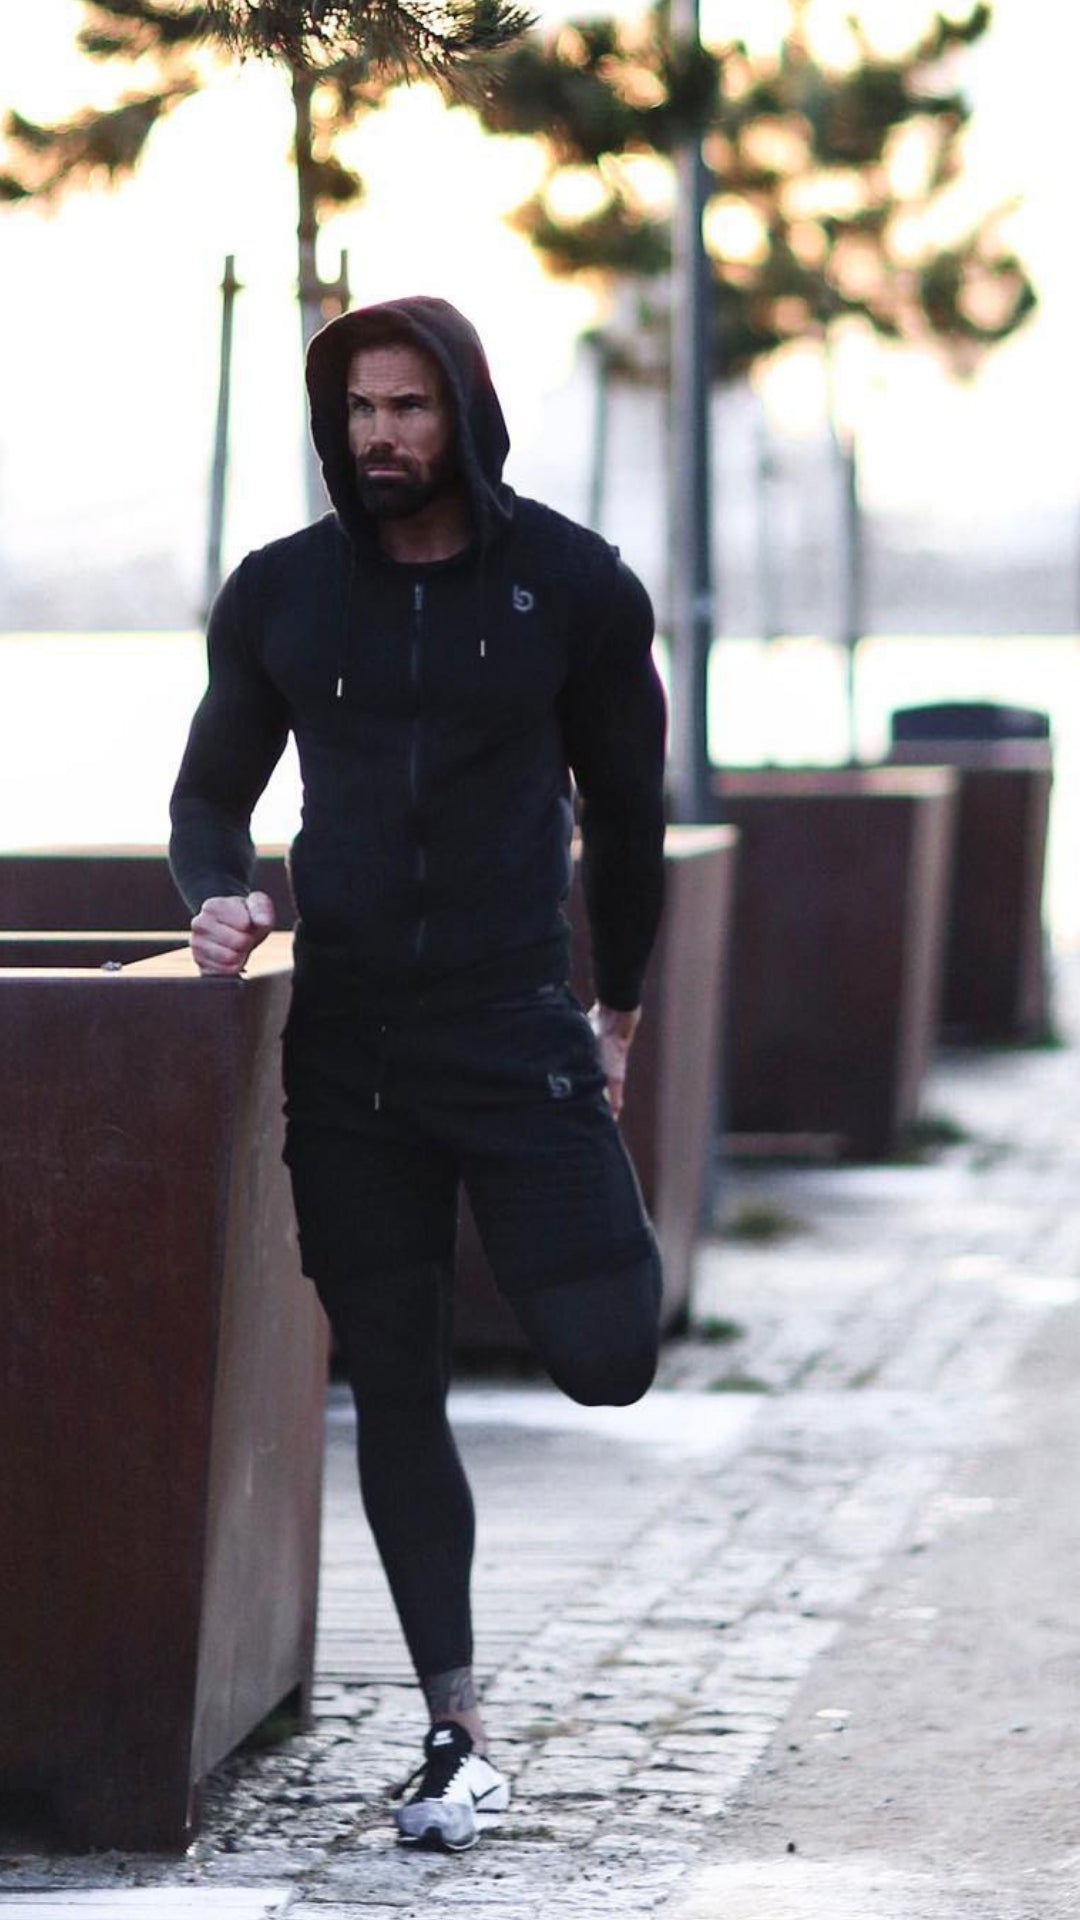 5 Coolest Gym Outfit Ideas For Men. #gym #outfits #mensfashion #streetstyle